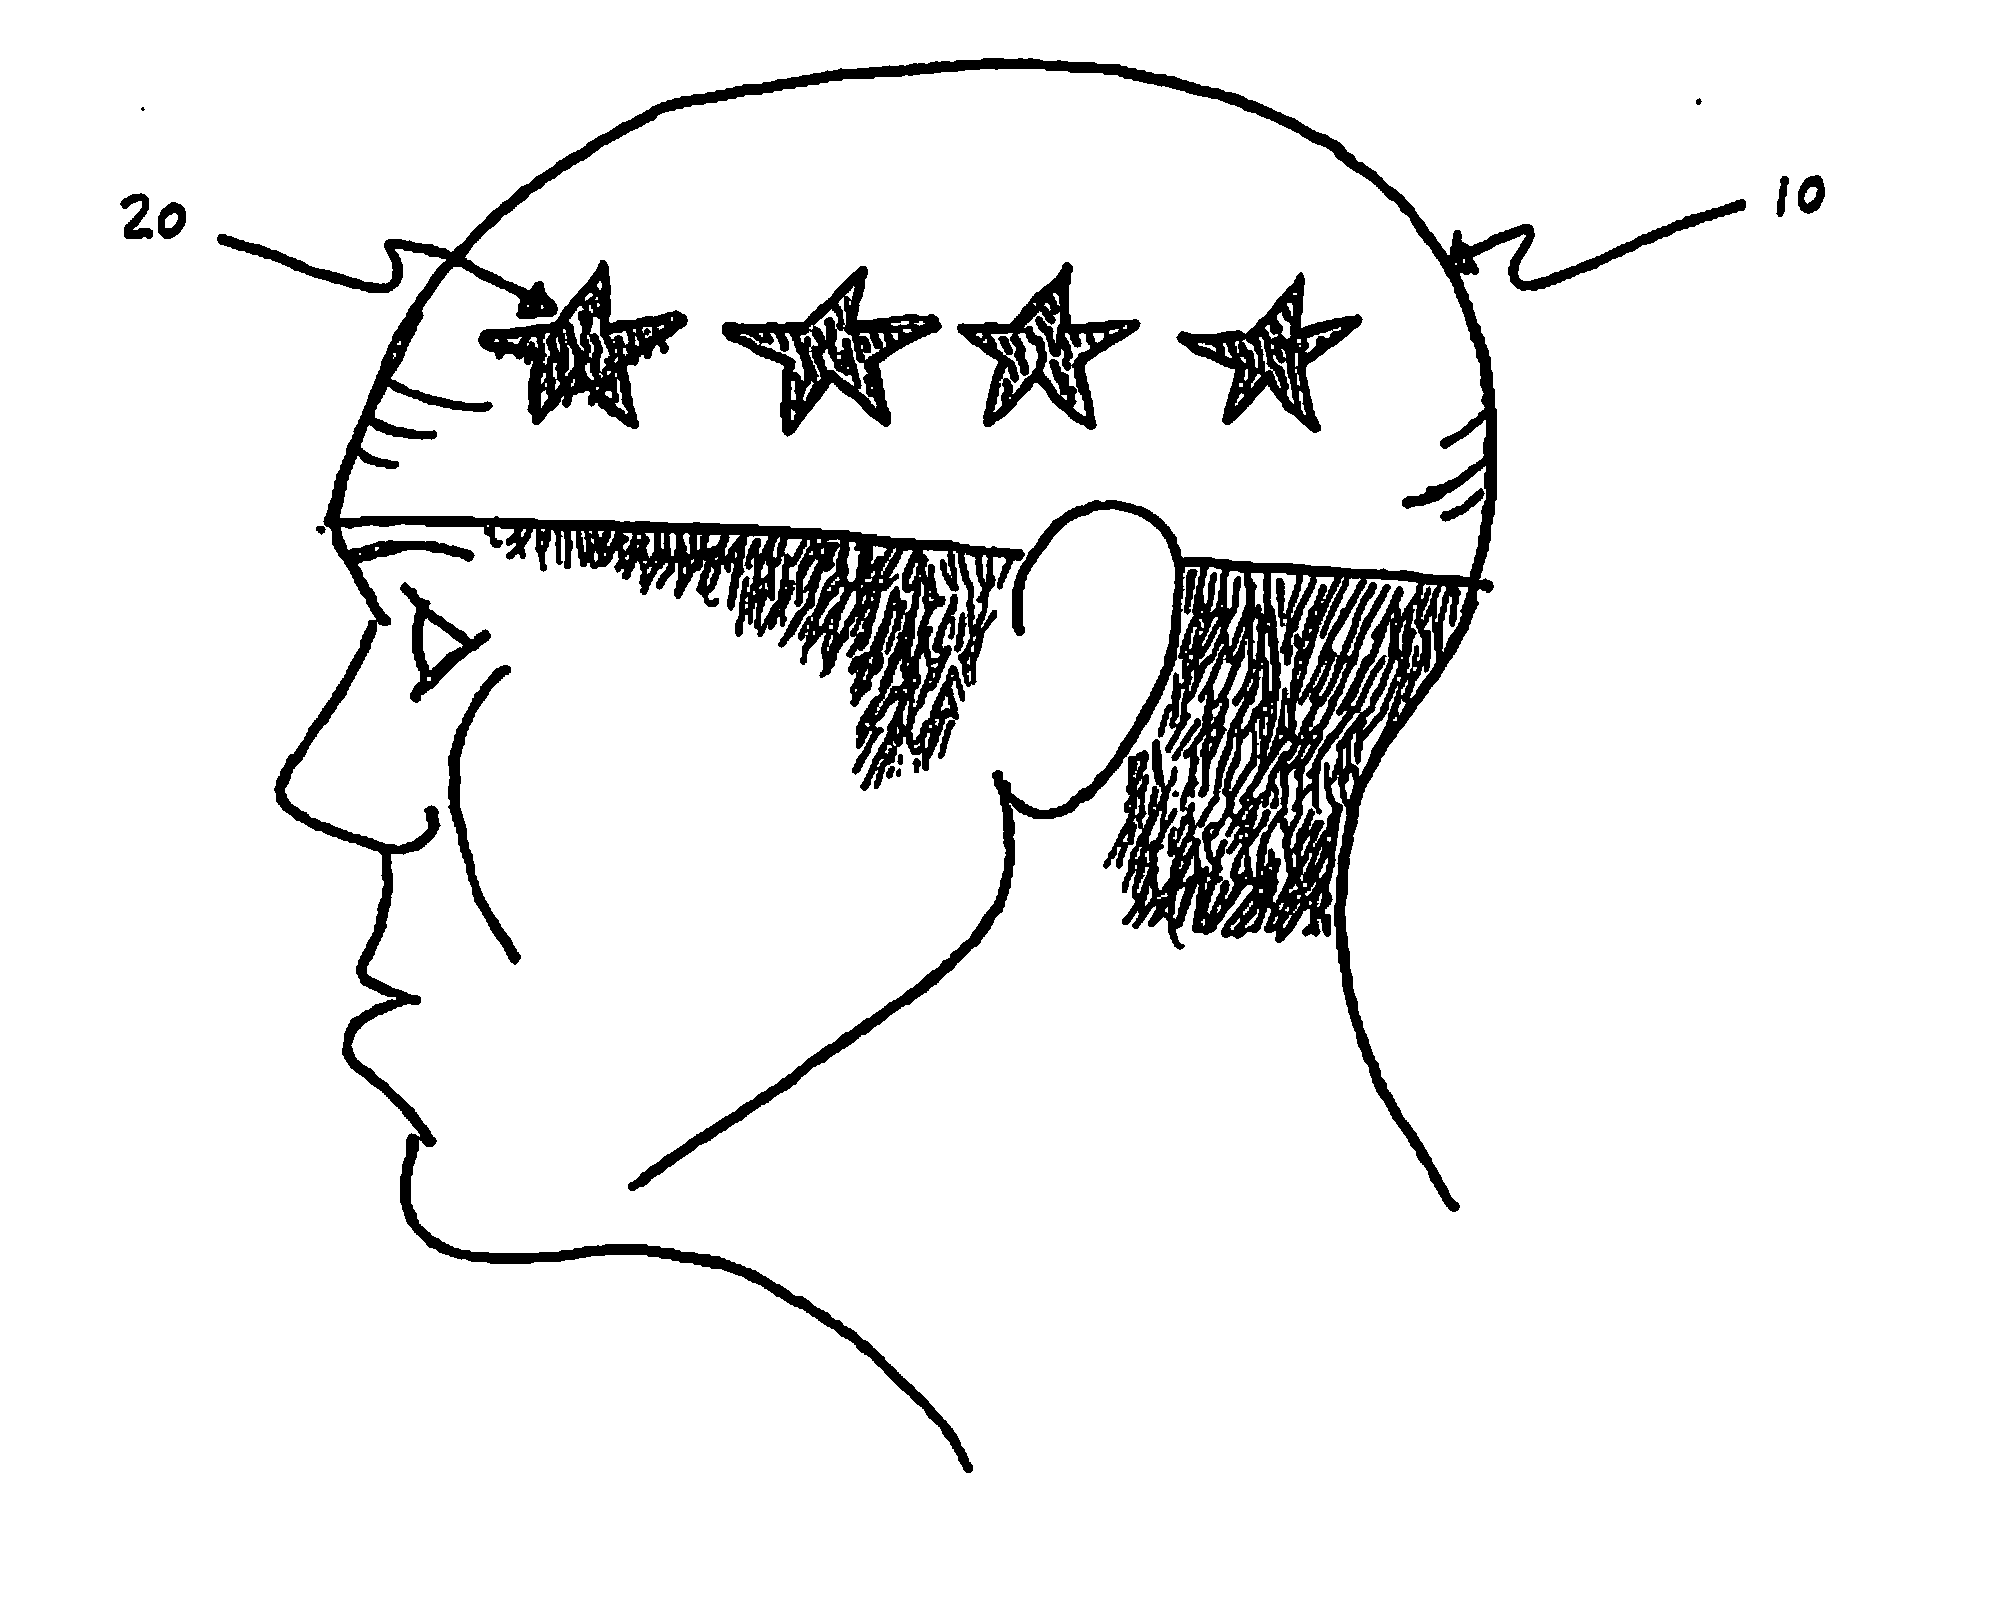 Hair Styling Mask and Method of Use